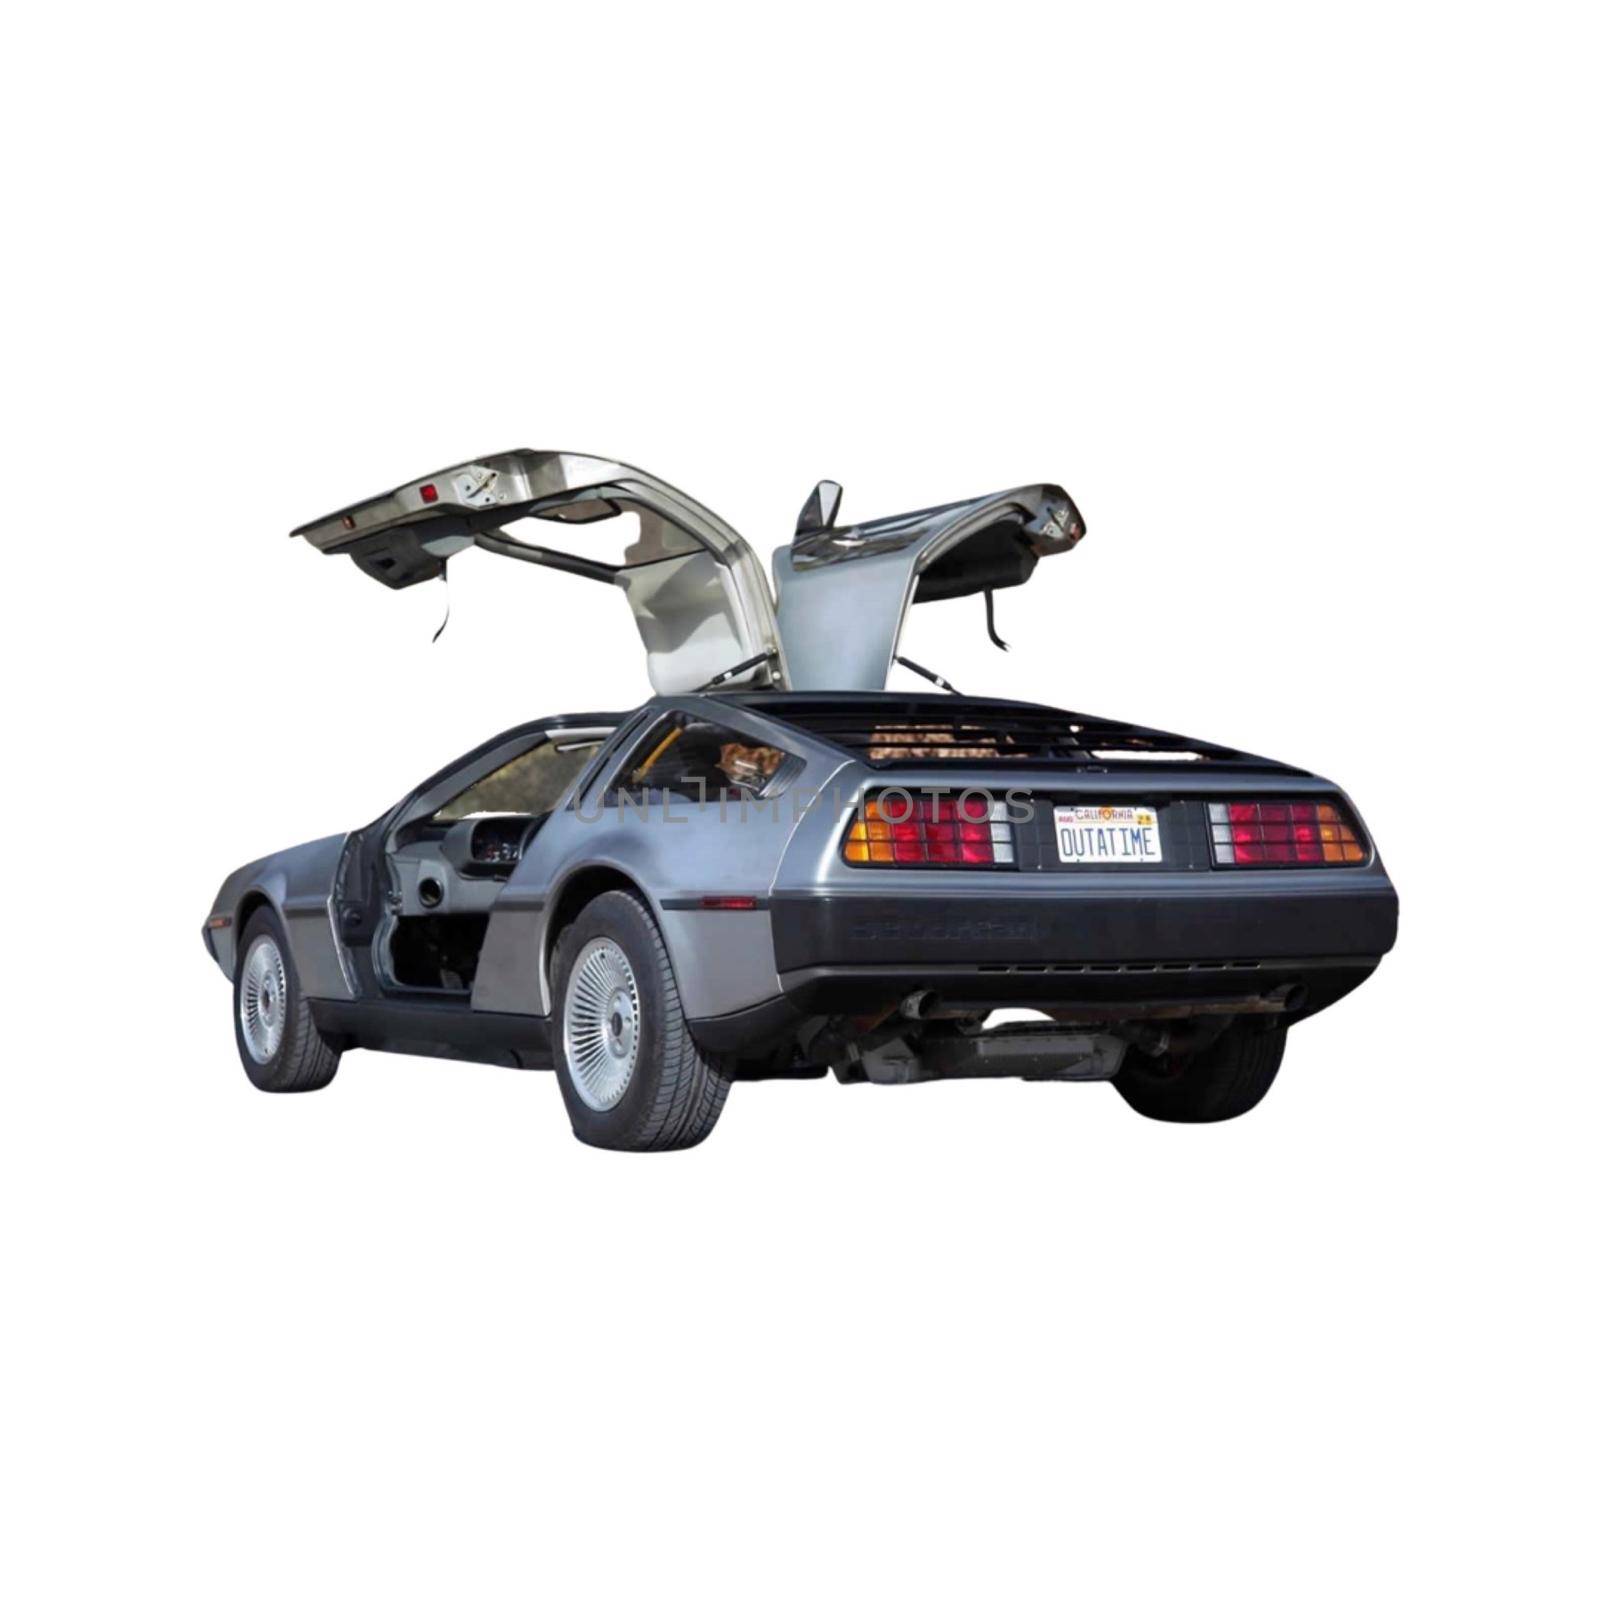 Picture of a Delorean DMC12 by FlyingDoctor